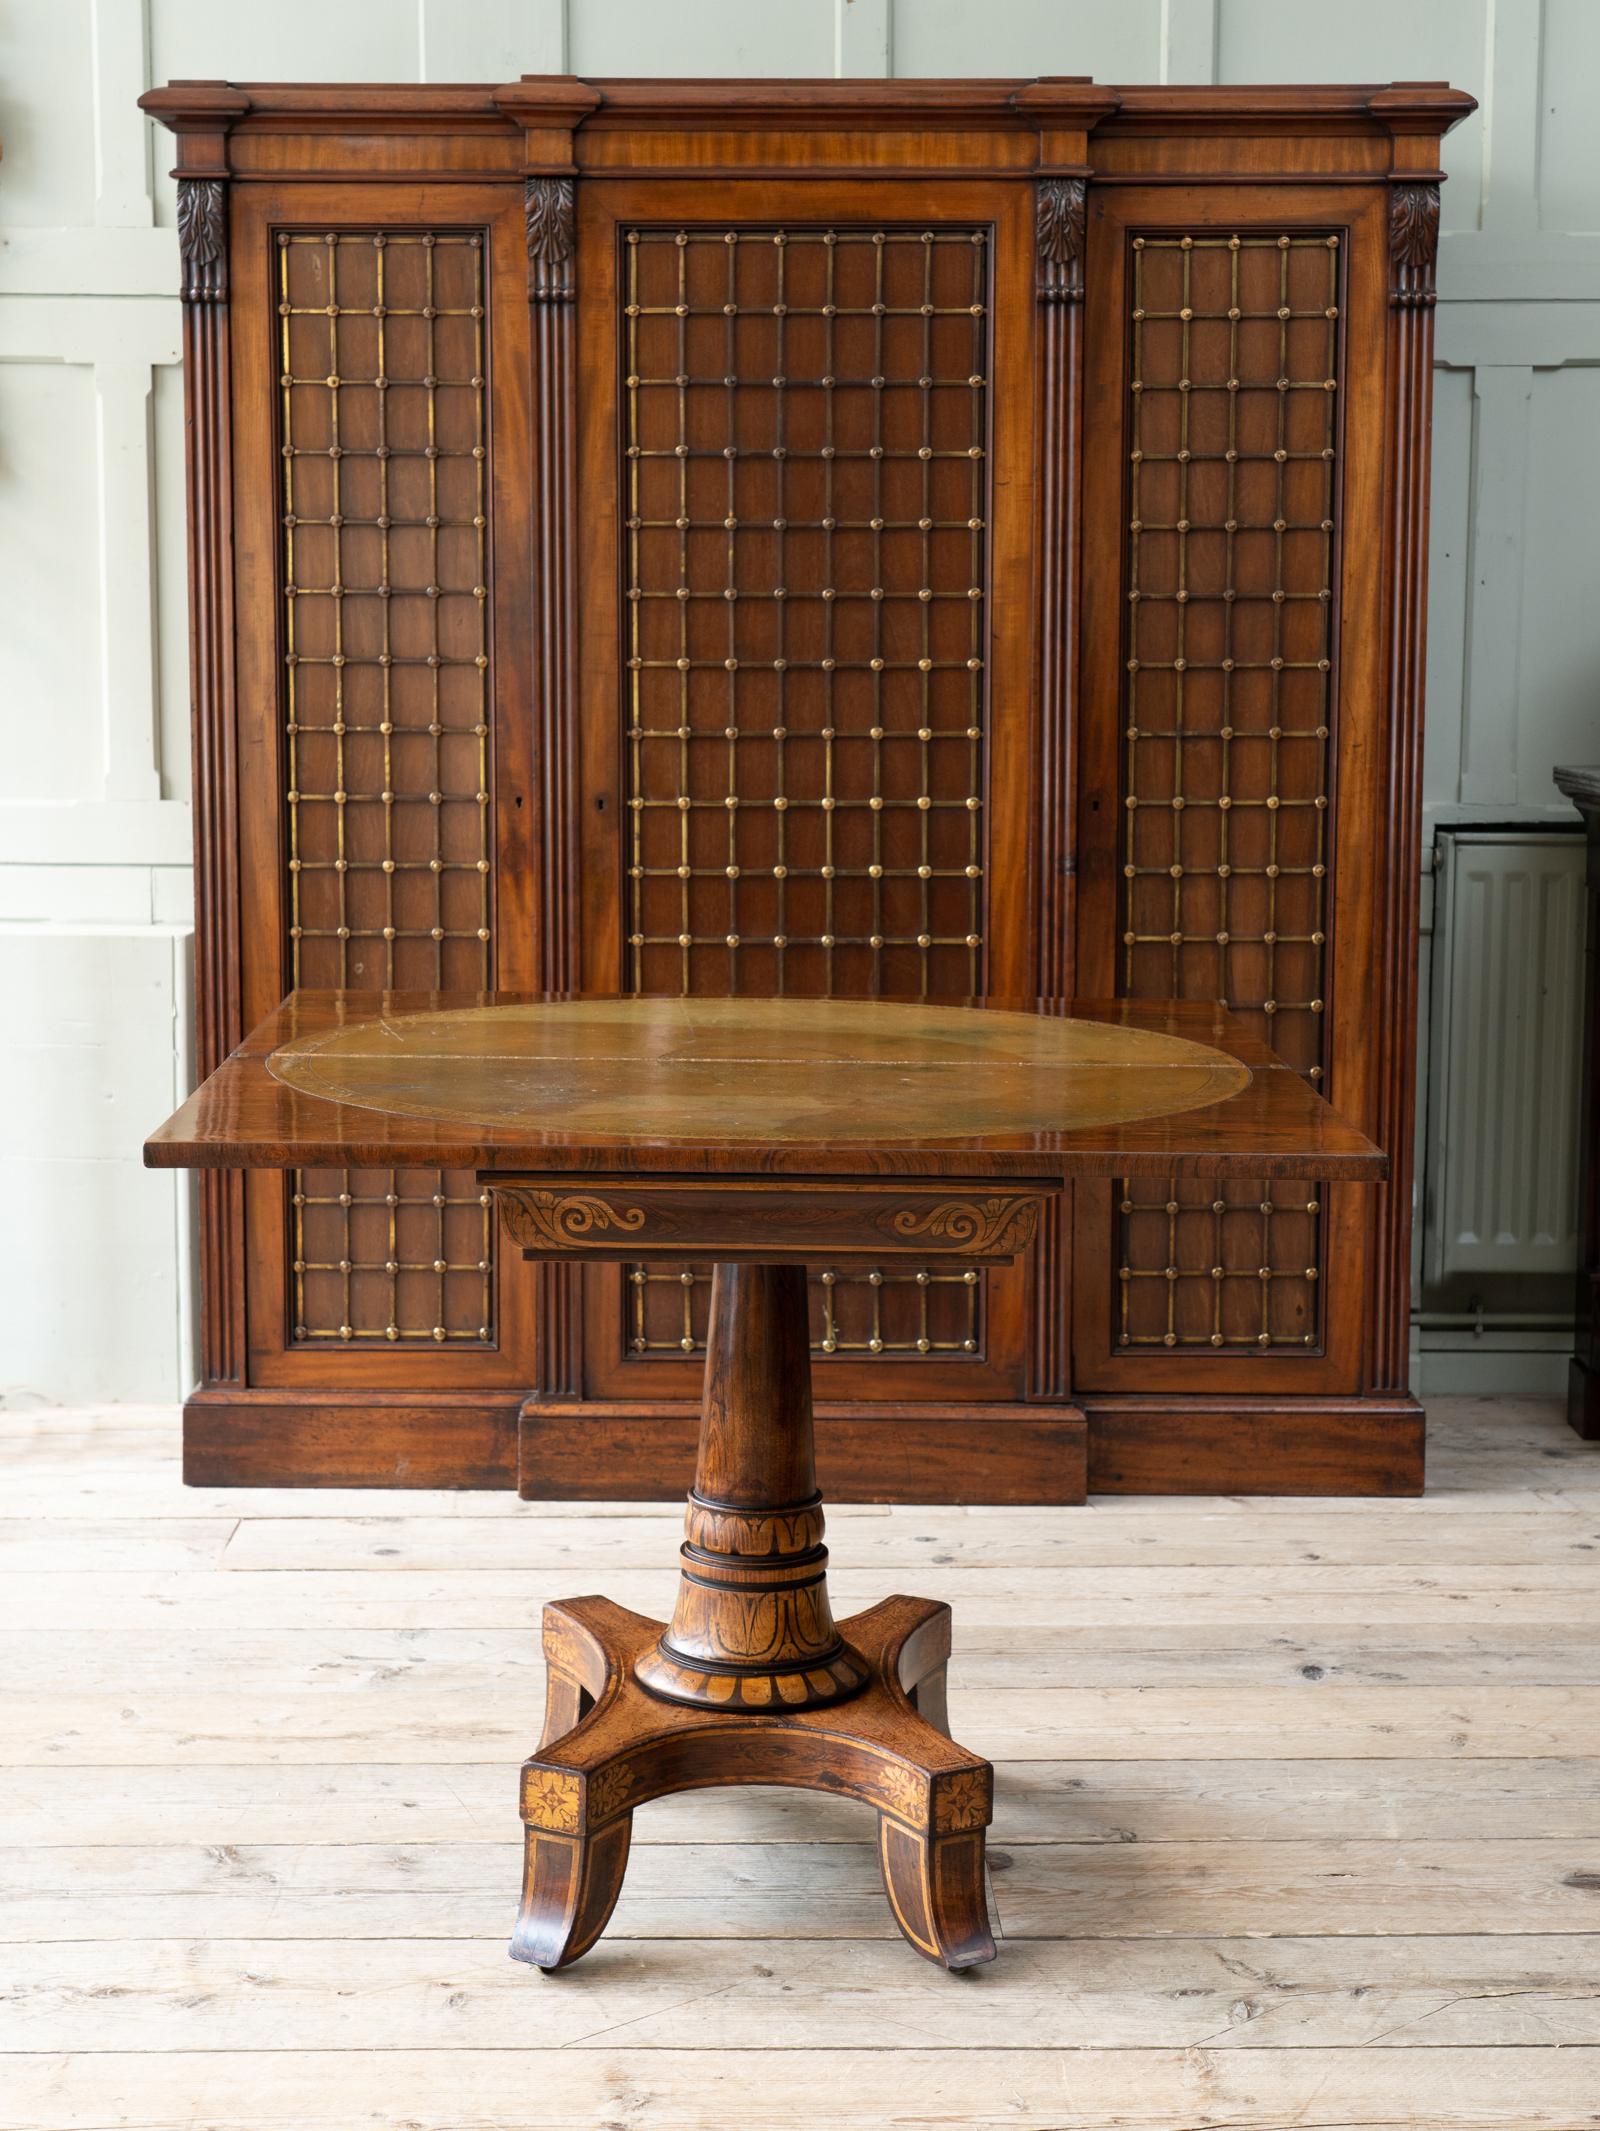 The rectangular fold over top raised on a tapering cylinder pillar with overall painted faux wood grain and pen work decoration on a quatrefoil base, inset caster to the shaped feet.

A highly original example, only the tooled leather top is not